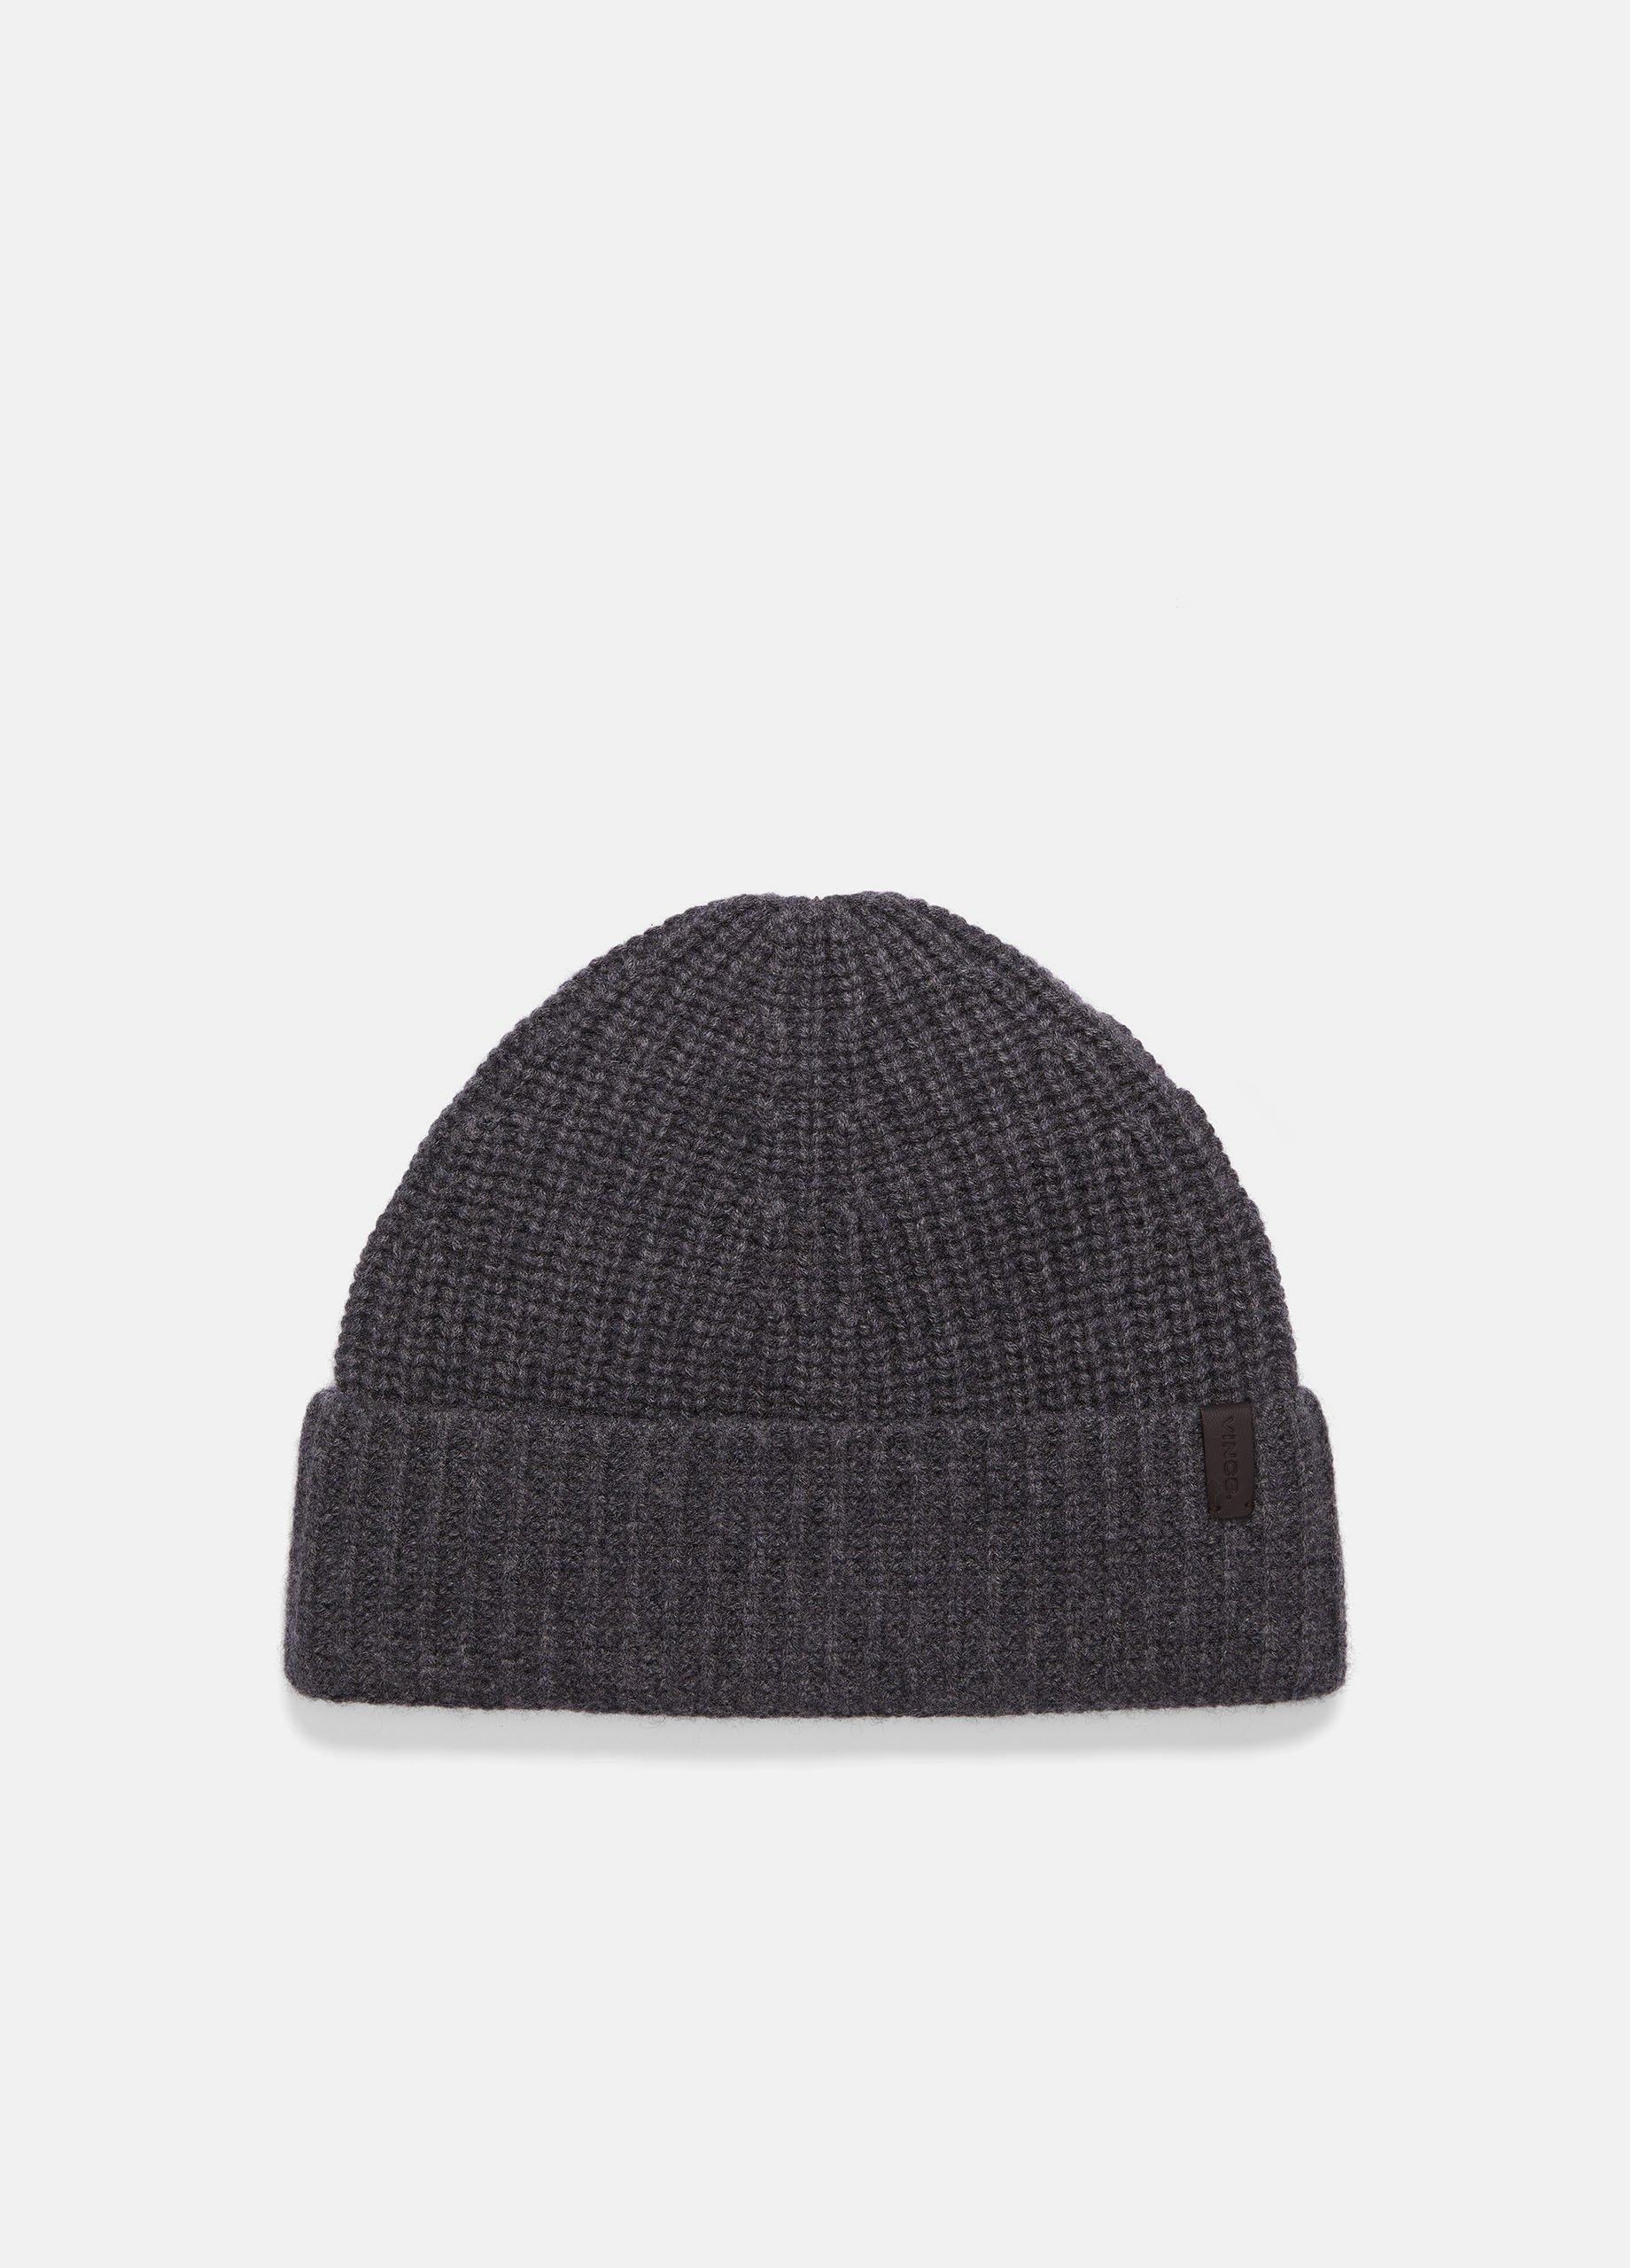 Wool-Cashmere Shaker-stitch Hat, Charcoal Vince